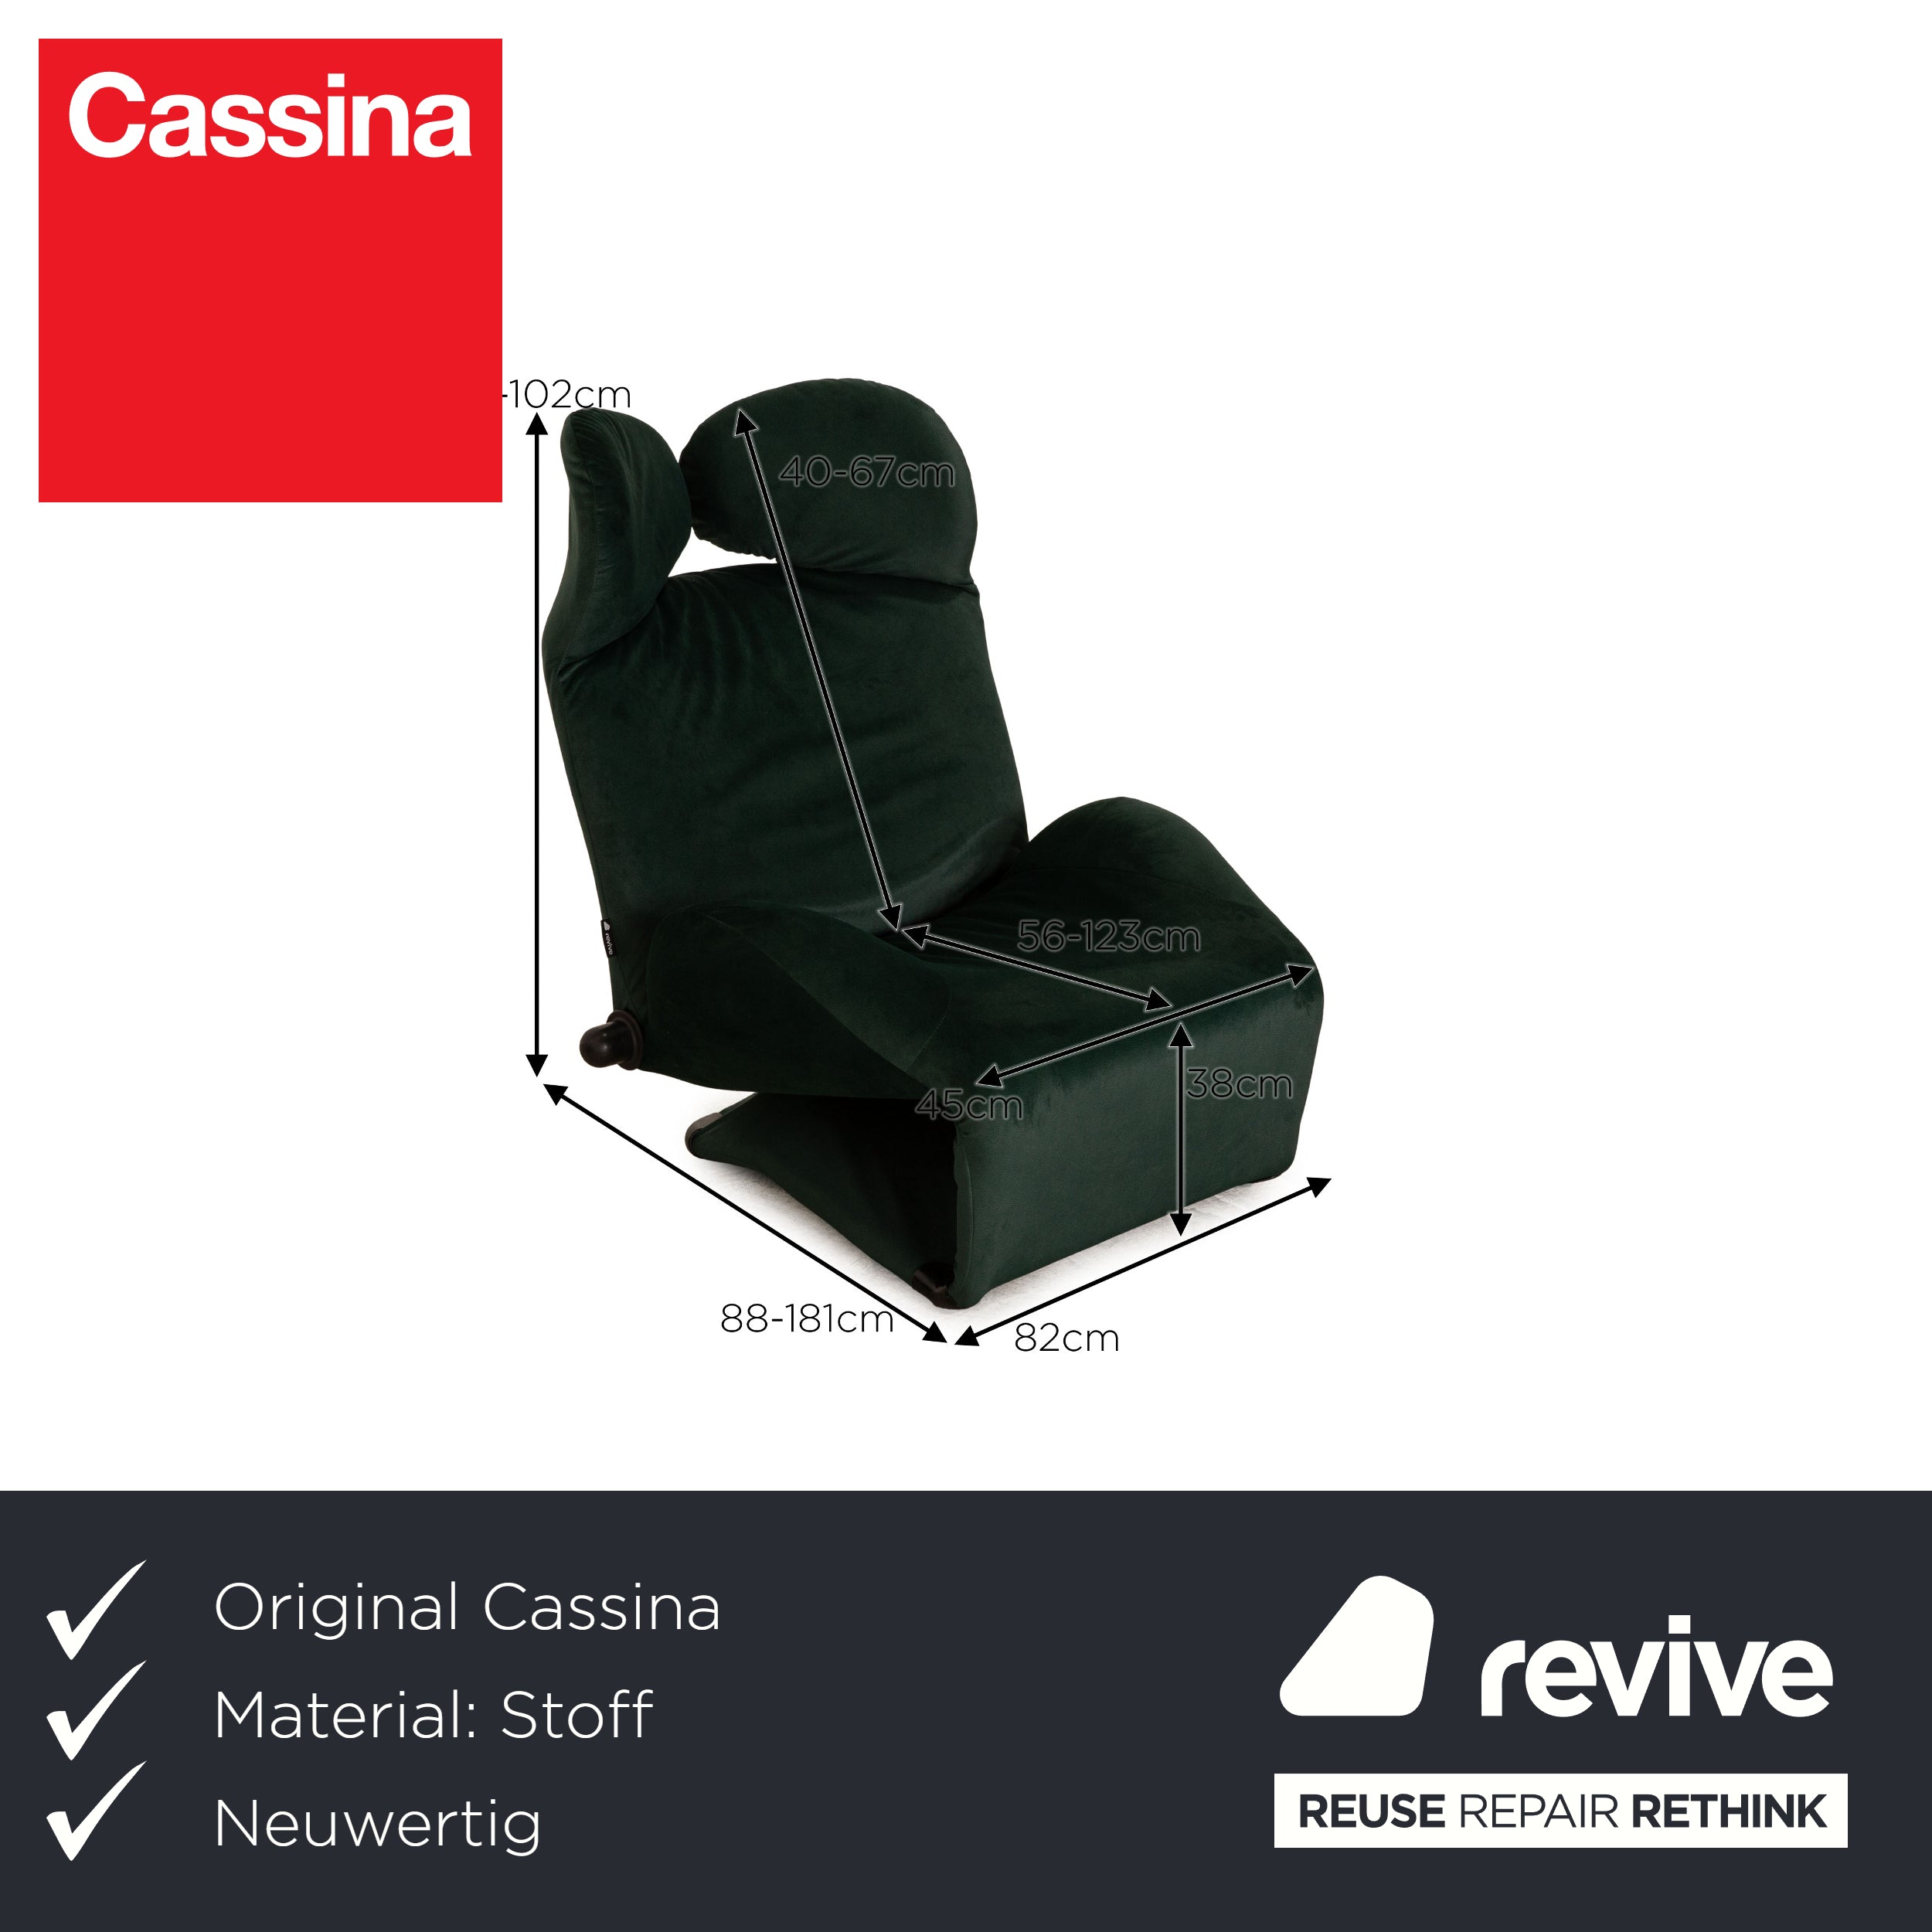 Cassina Wink fabric armchair new cover green function